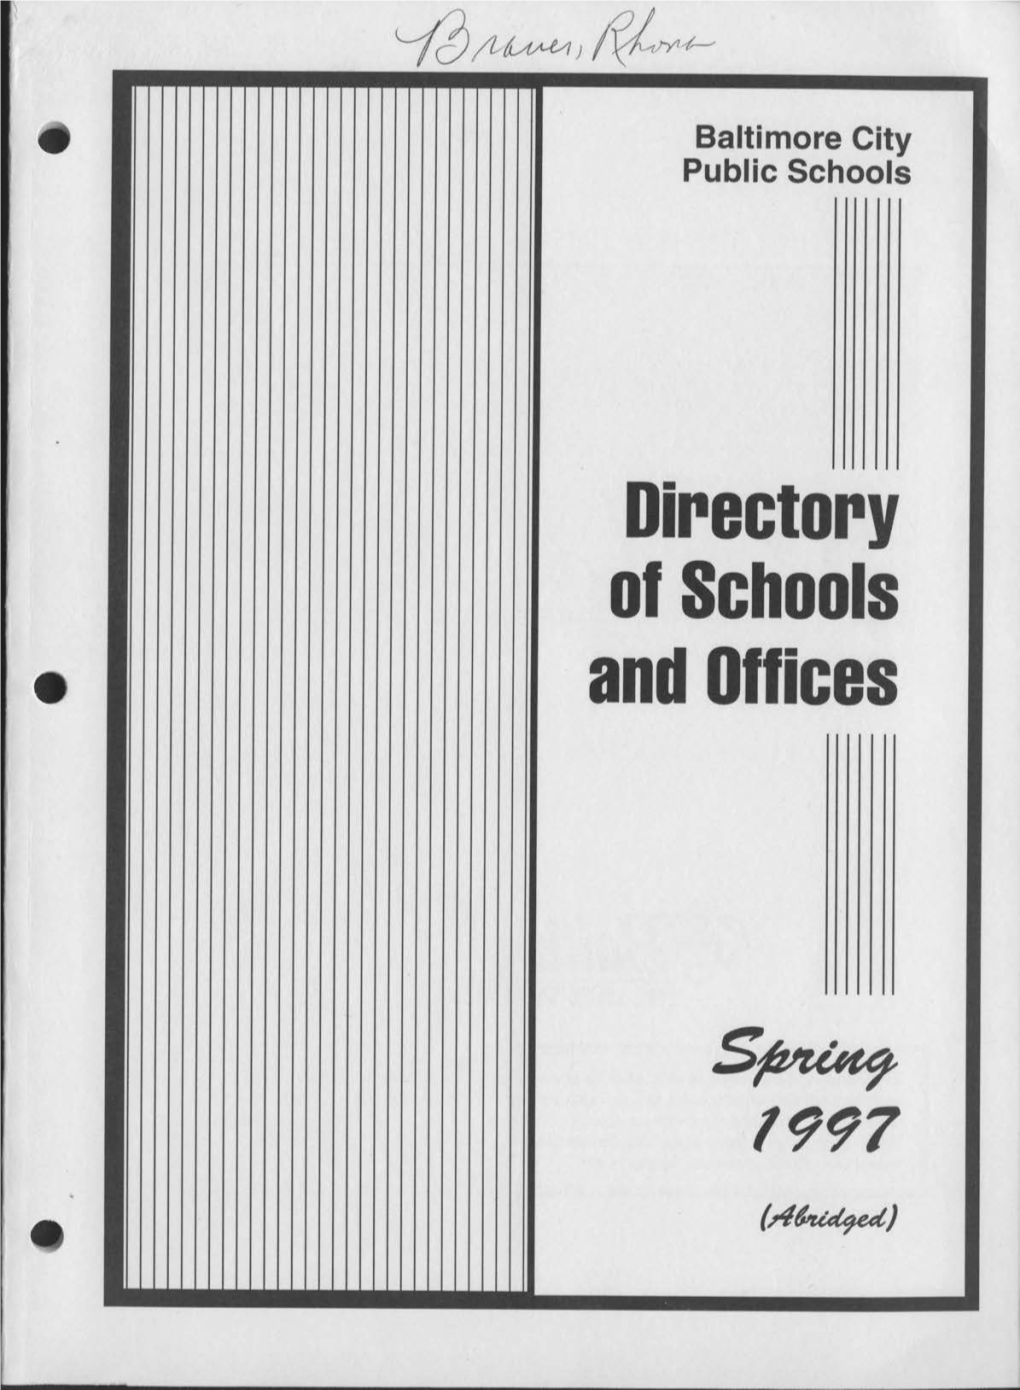 Directory of Schools and Offices